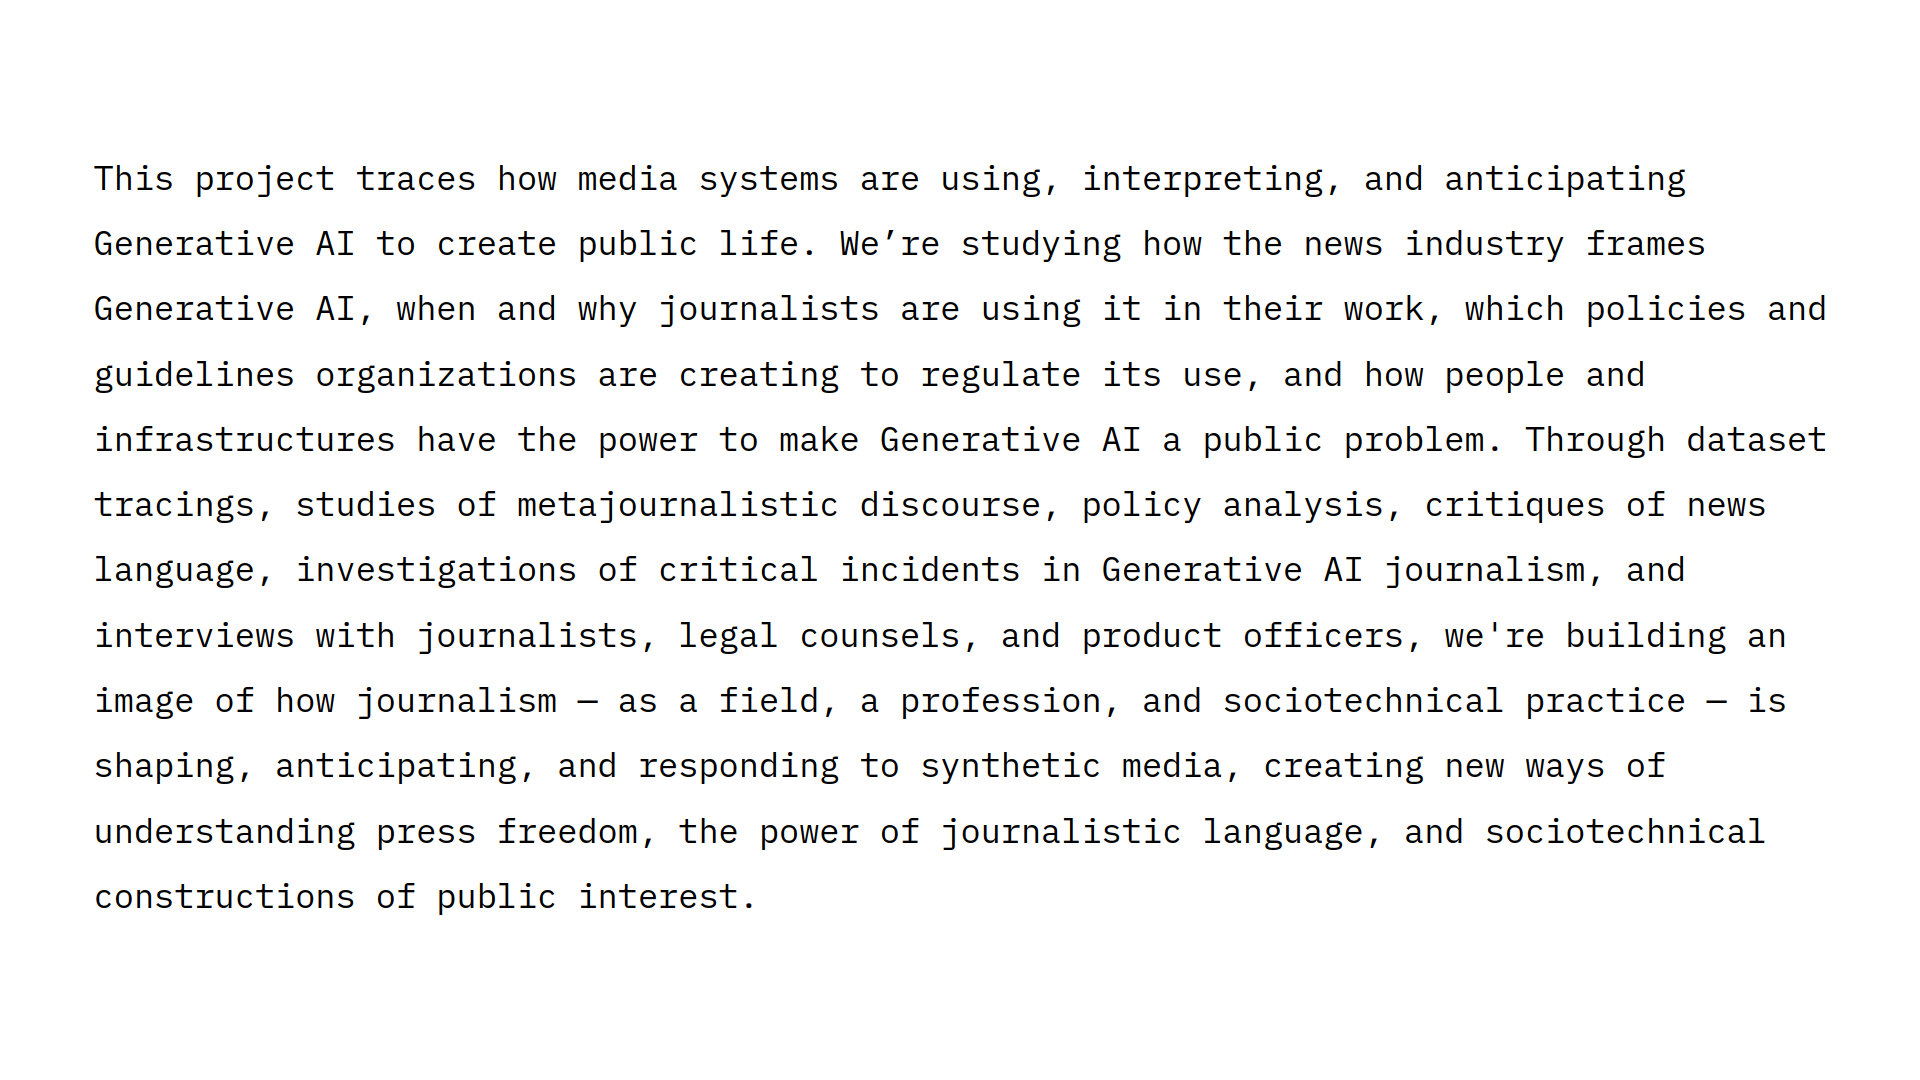 This project traces how media systems are using, interpreting, and anticipating Generative AI to create public life. We’re studying how the news industry frames Generative AI, when and why journalists are using it in their work, which policies and <br />guidelines organizations are creating to regulate its use, and how people and infrastructures have the power to make Generative AI a public problem. Through dataset tracings, studies of metajournalistic discourse, policy analysis, critiques of news <br />language, investigations of critical incidents in Generative AI journalism, and interviews with journalists, legal counsels, and product officers, we're building an image of how journalism — as a field, a profession, and sociotechnical practice — is <br />shaping, anticipating, and responding to synthetic media, creating new ways of understanding press freedom, the power of journalistic language, and sociotechnical constructions of public interest.